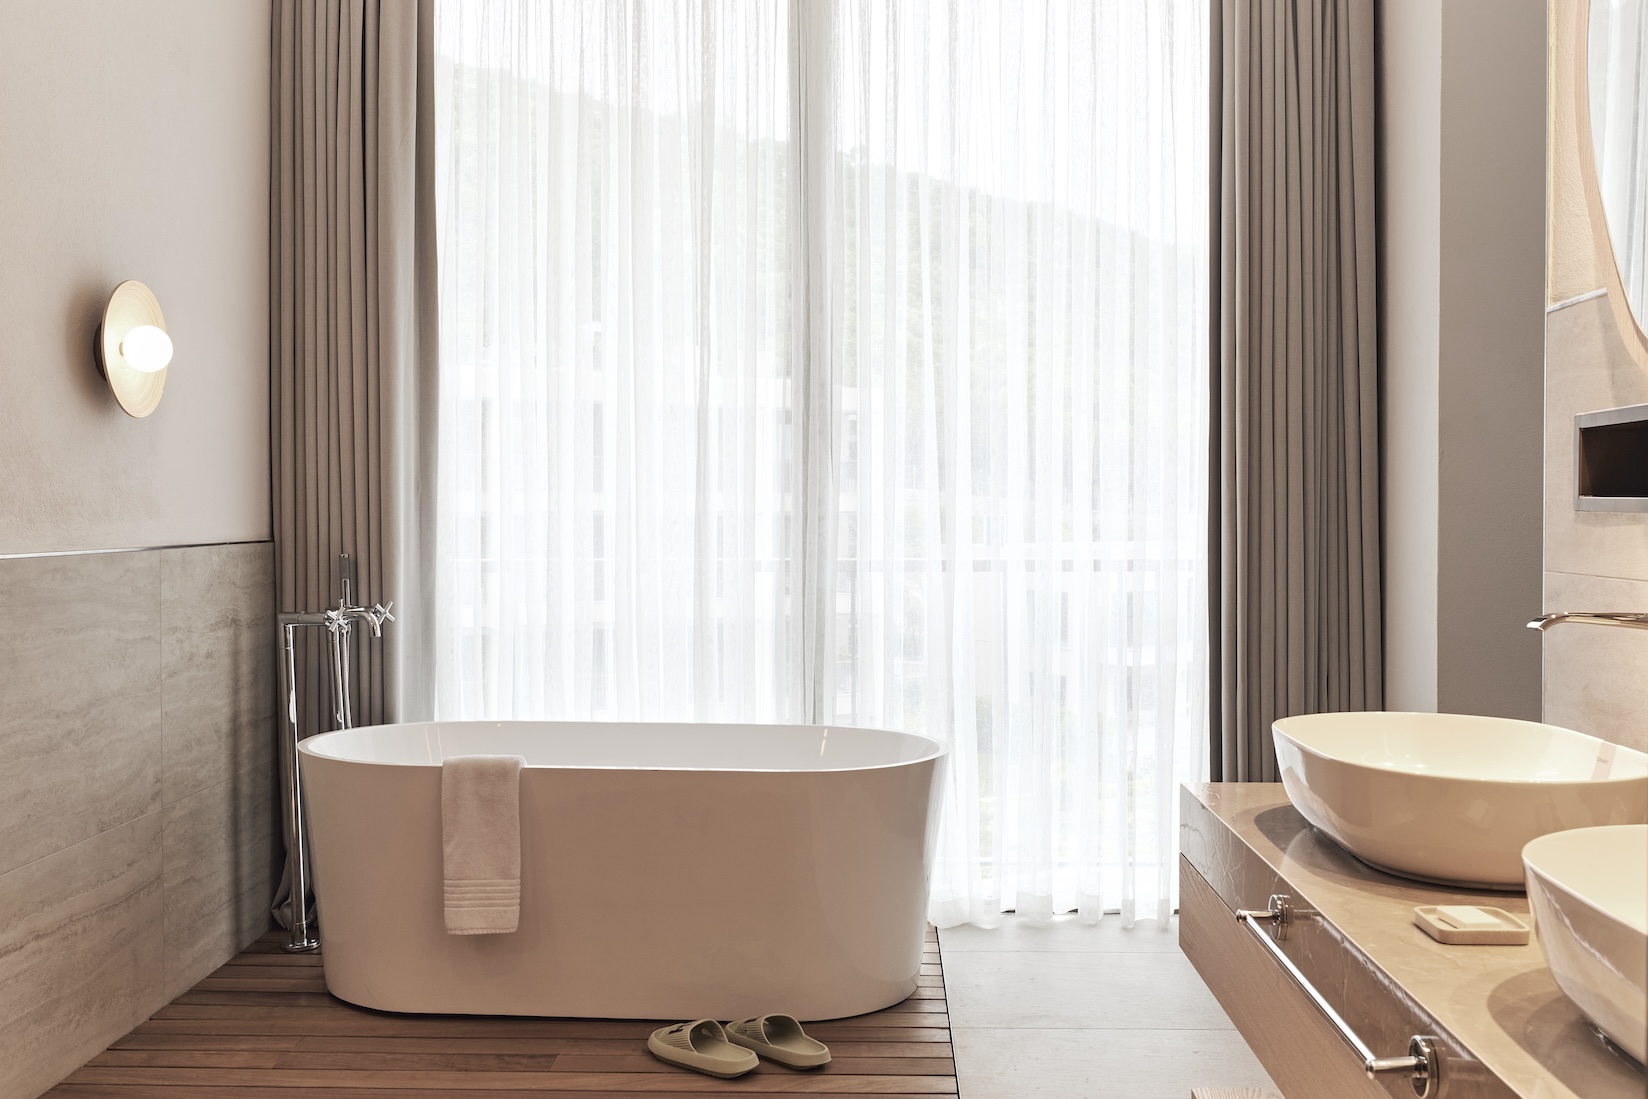 Large soaking tub in a bathroom with floor to ceiling windows covered by curtain